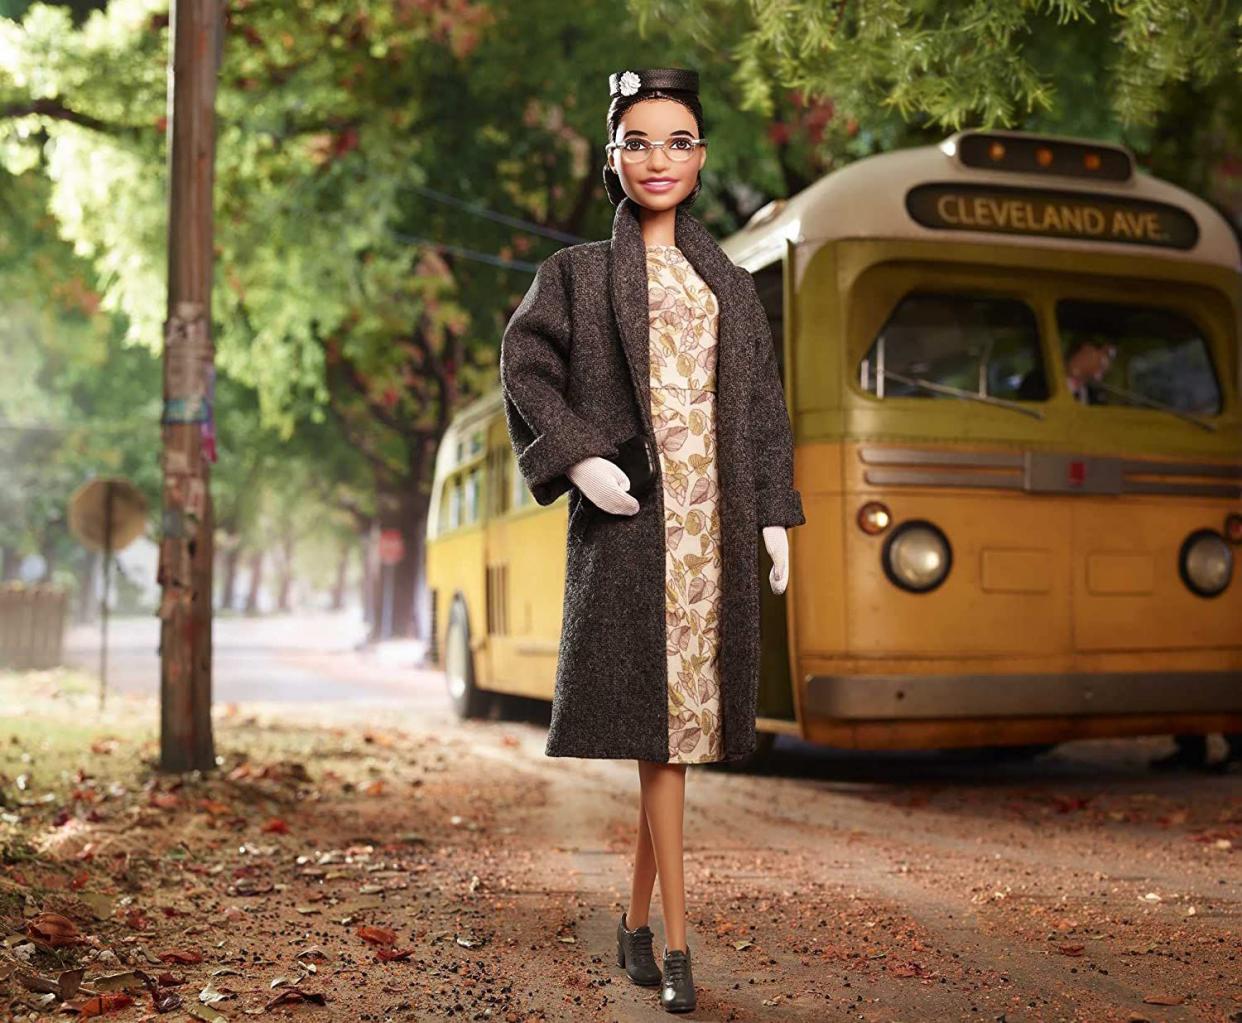 Barbie Inspiring Women Series Rosa Parks Collectible Barbie Doll